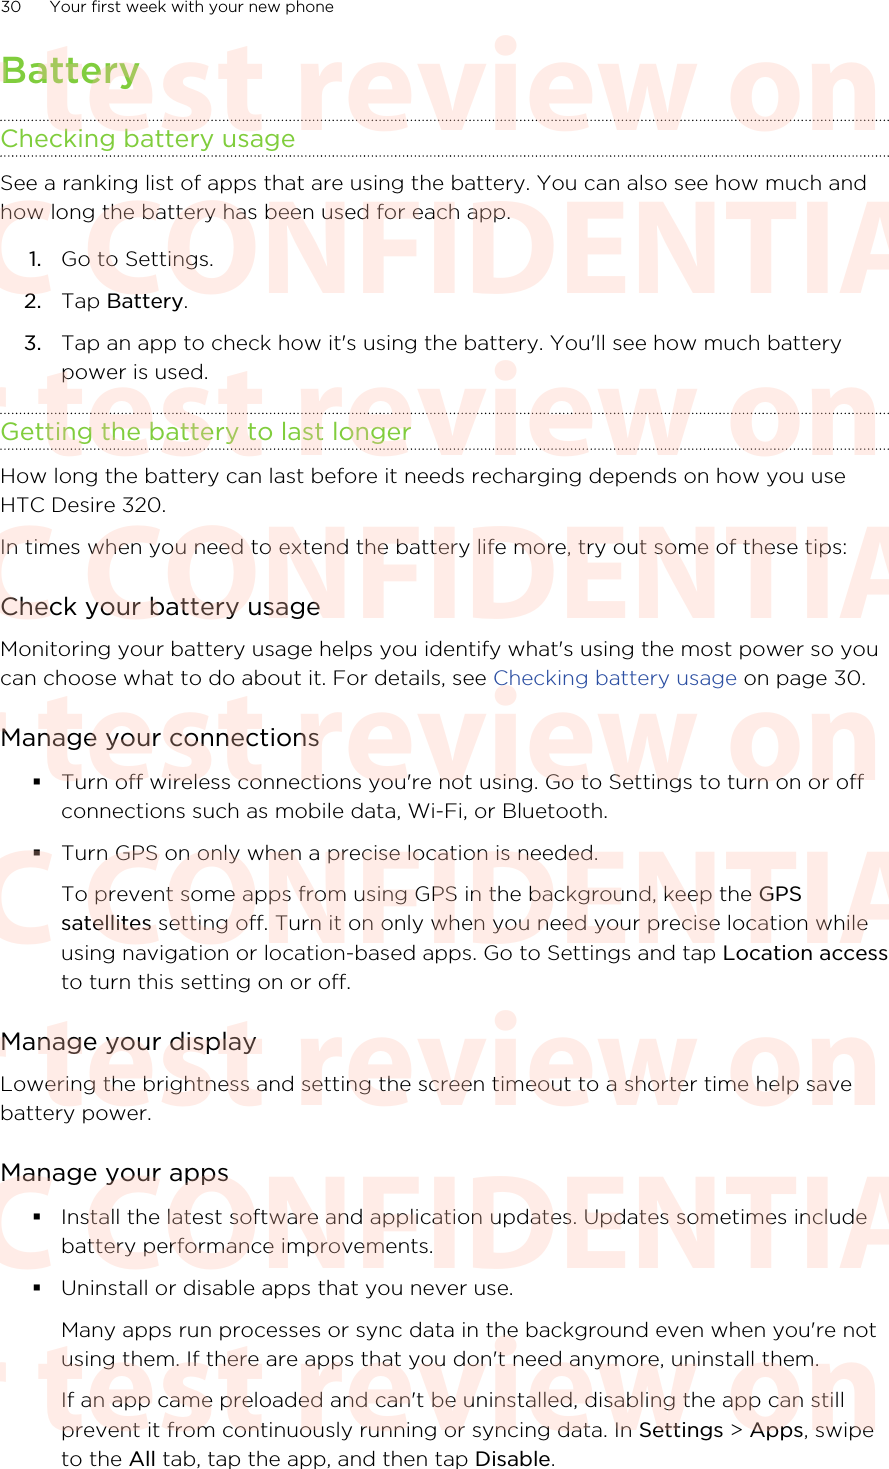 BatteryChecking battery usageSee a ranking list of apps that are using the battery. You can also see how much andhow long the battery has been used for each app.1. Go to Settings.2. Tap Battery.3. Tap an app to check how it&apos;s using the battery. You&apos;ll see how much batterypower is used.Getting the battery to last longerHow long the battery can last before it needs recharging depends on how you useHTC Desire 320.In times when you need to extend the battery life more, try out some of these tips:Check your battery usageMonitoring your battery usage helps you identify what&apos;s using the most power so youcan choose what to do about it. For details, see Checking battery usage on page 30.Manage your connections§Turn off wireless connections you&apos;re not using. Go to Settings to turn on or offconnections such as mobile data, Wi-Fi, or Bluetooth.§Turn GPS on only when a precise location is needed.To prevent some apps from using GPS in the background, keep the GPSsatellites setting off. Turn it on only when you need your precise location whileusing navigation or location-based apps. Go to Settings and tap Location accessto turn this setting on or off.Manage your displayLowering the brightness and setting the screen timeout to a shorter time help savebattery power.Manage your apps§Install the latest software and application updates. Updates sometimes includebattery performance improvements.§Uninstall or disable apps that you never use.Many apps run processes or sync data in the background even when you&apos;re notusing them. If there are apps that you don&apos;t need anymore, uninstall them.If an app came preloaded and can&apos;t be uninstalled, disabling the app can stillprevent it from continuously running or syncing data. In Settings &gt; Apps, swipeto the All tab, tap the app, and then tap Disable.30 Your first week with your new phoneHTC CONFIDENTIAL For test review only HTC CONFIDENTIAL For test review only HTC CONFIDENTIAL For test review only HTC CONFIDENTIAL For test review only HTC CONFIDENTIAL For test review only HTC CONFIDENTIAL For test review only